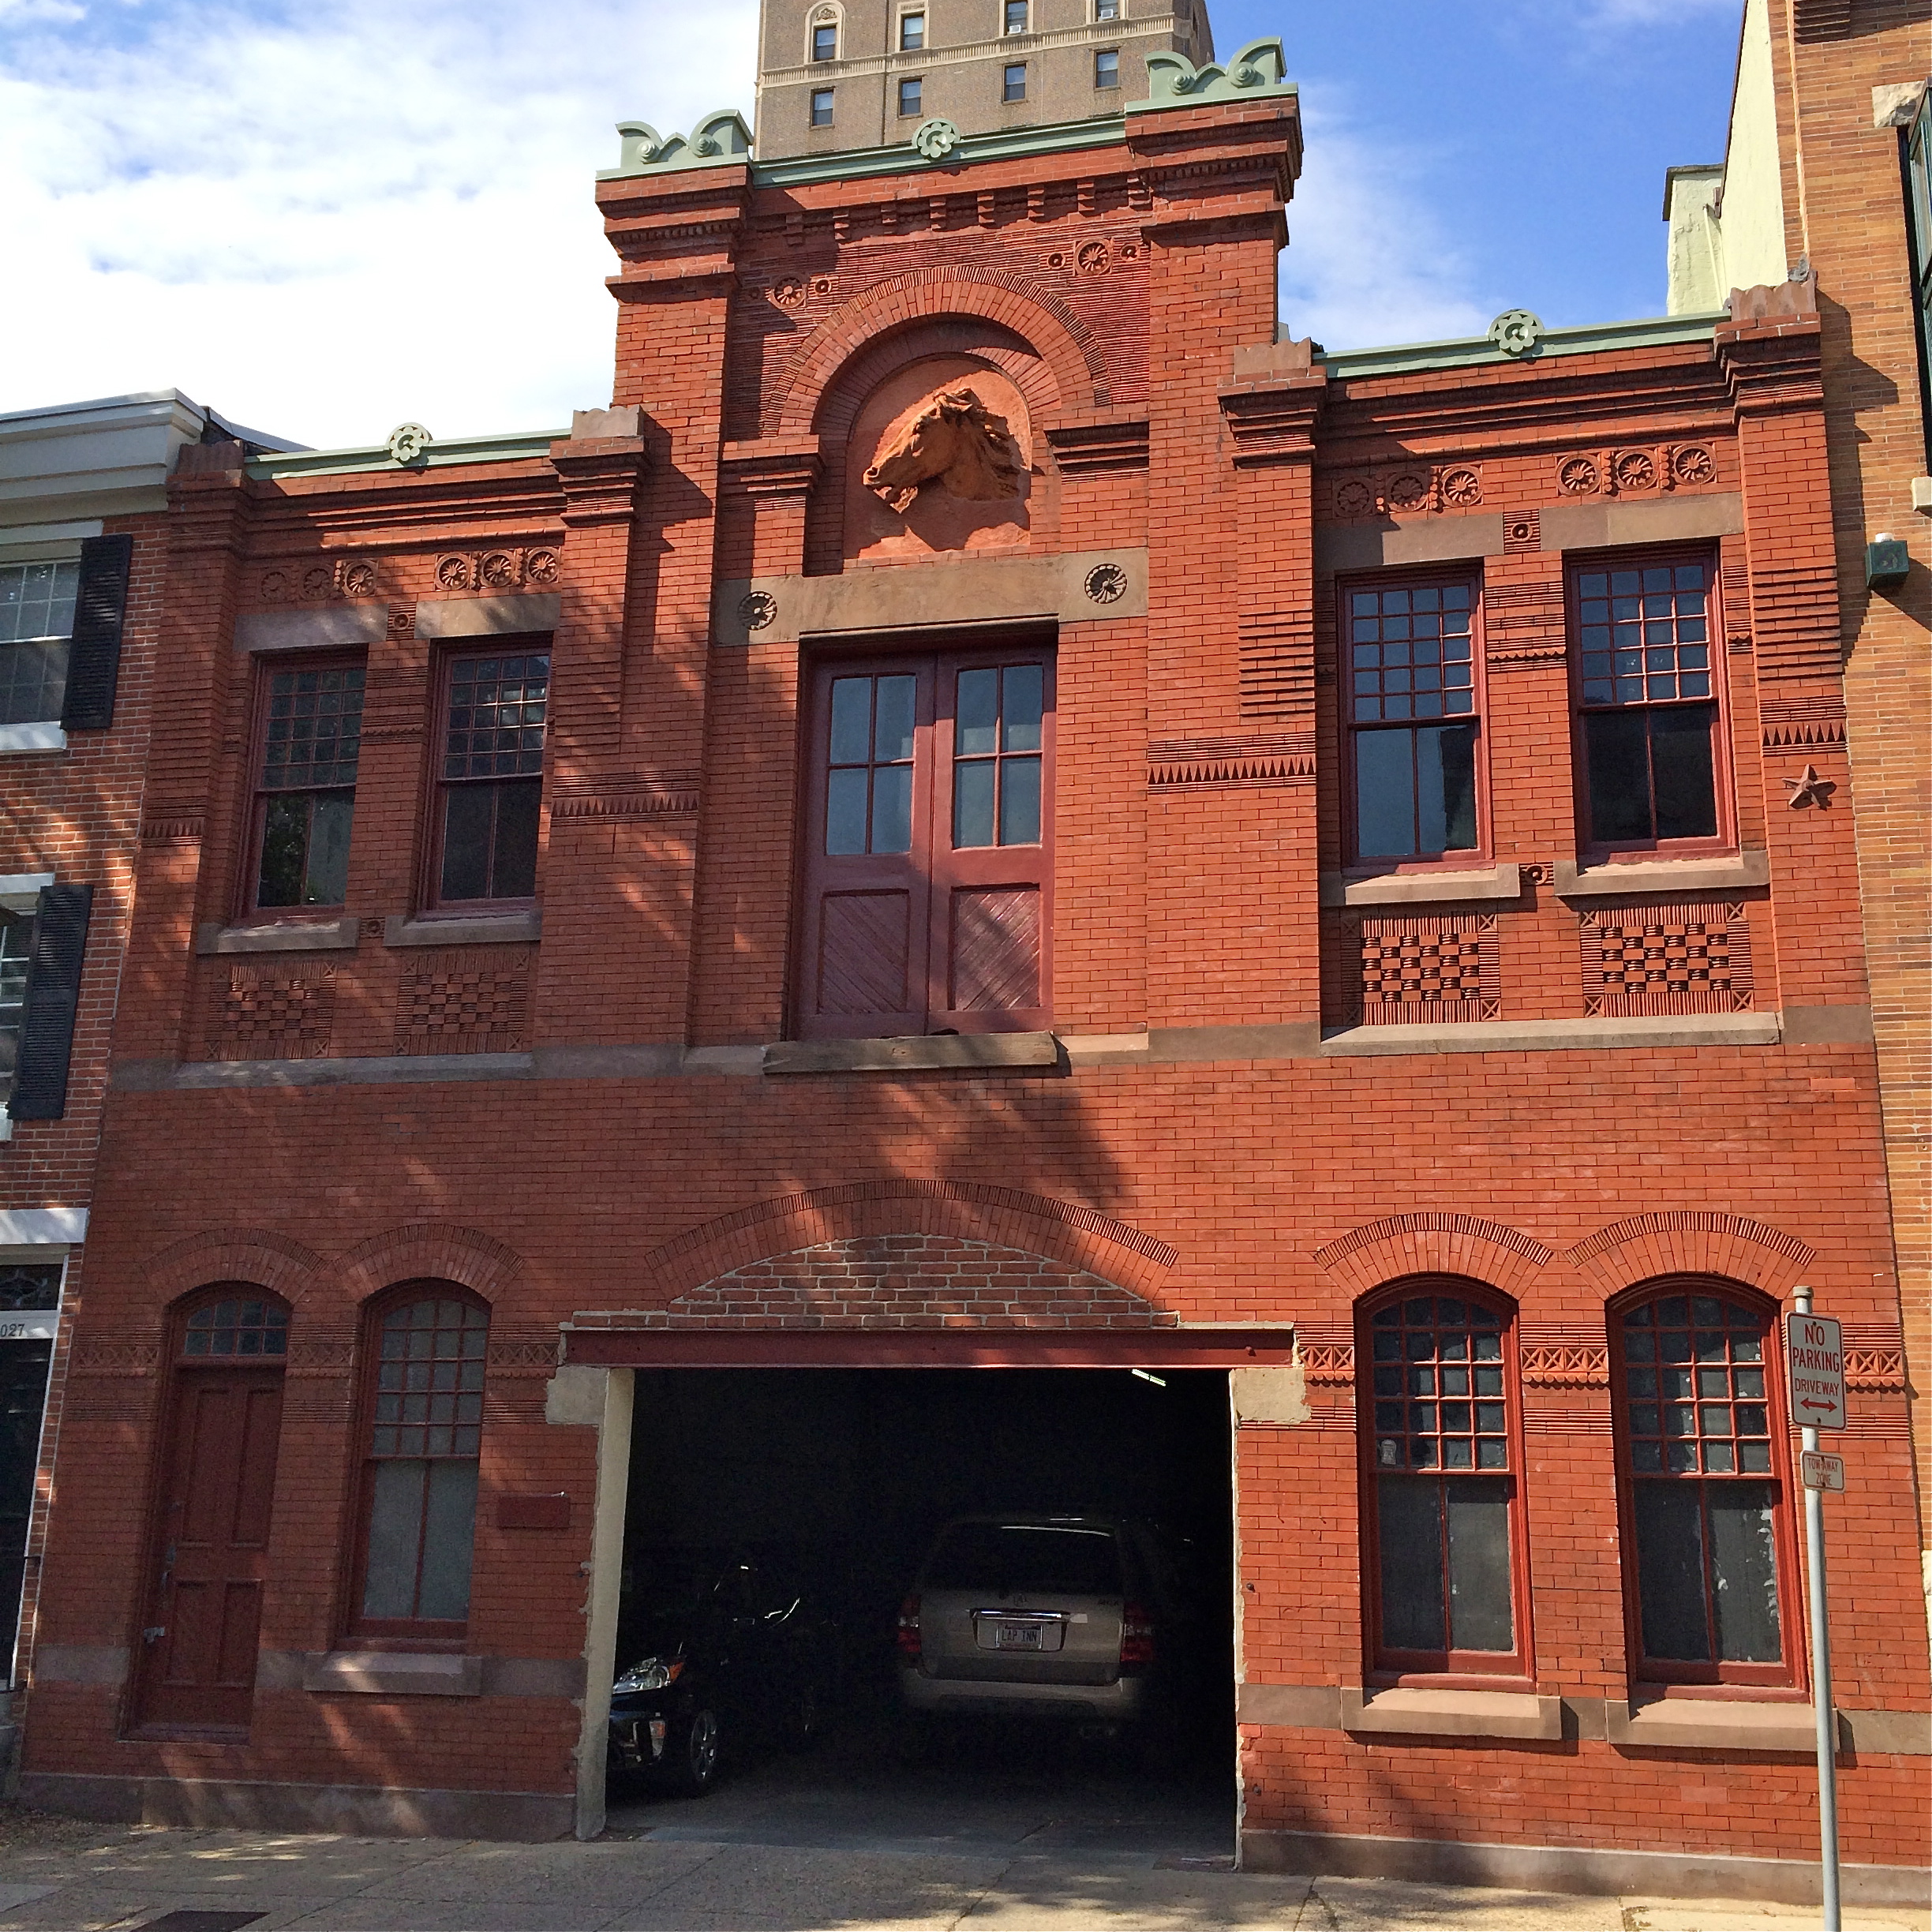 This horse stable turned garage on Rittenhouse Street is being converted to residential use.